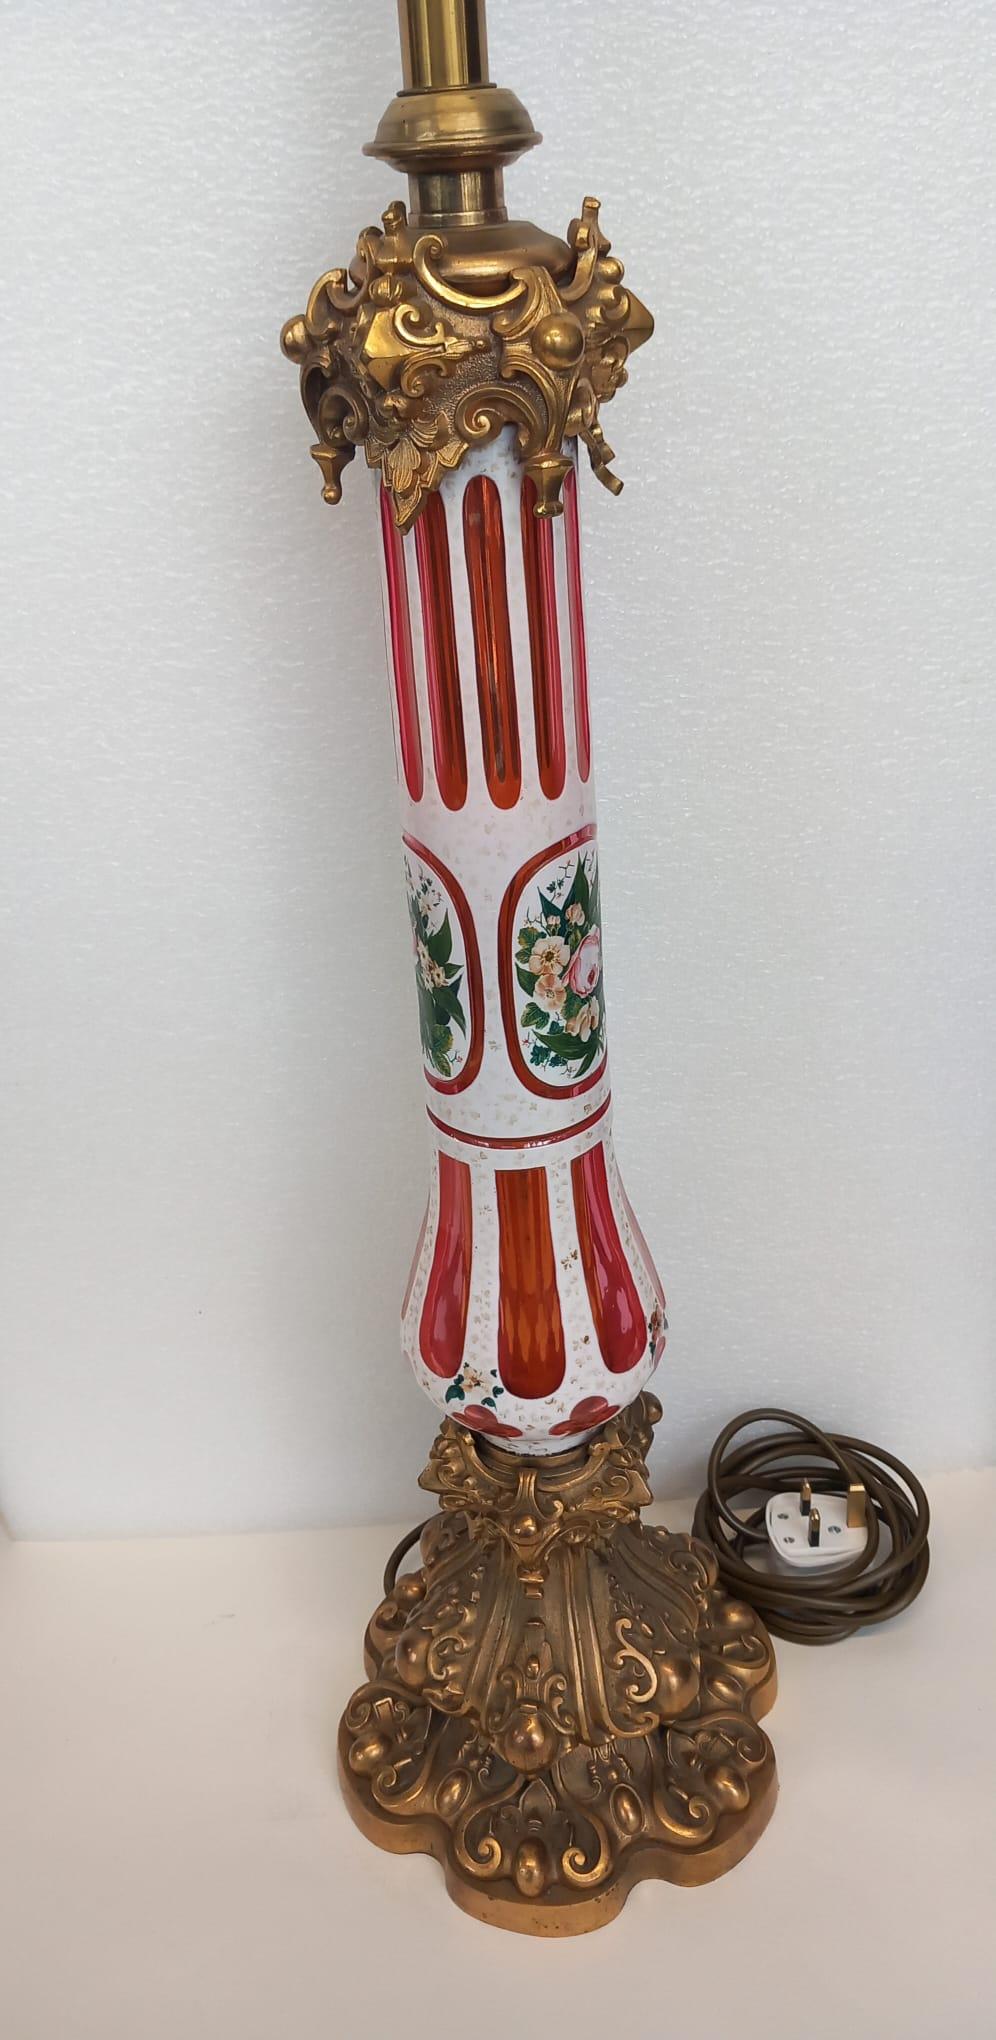 A red Bohemian glass lamp dating from the mid nineteenth century, decorated with a white striped enamel design, hand painted with elaborate flower decoration.
The glass lamp sits on an ormolu gothic style foot or base. 
The top part of the lamp has